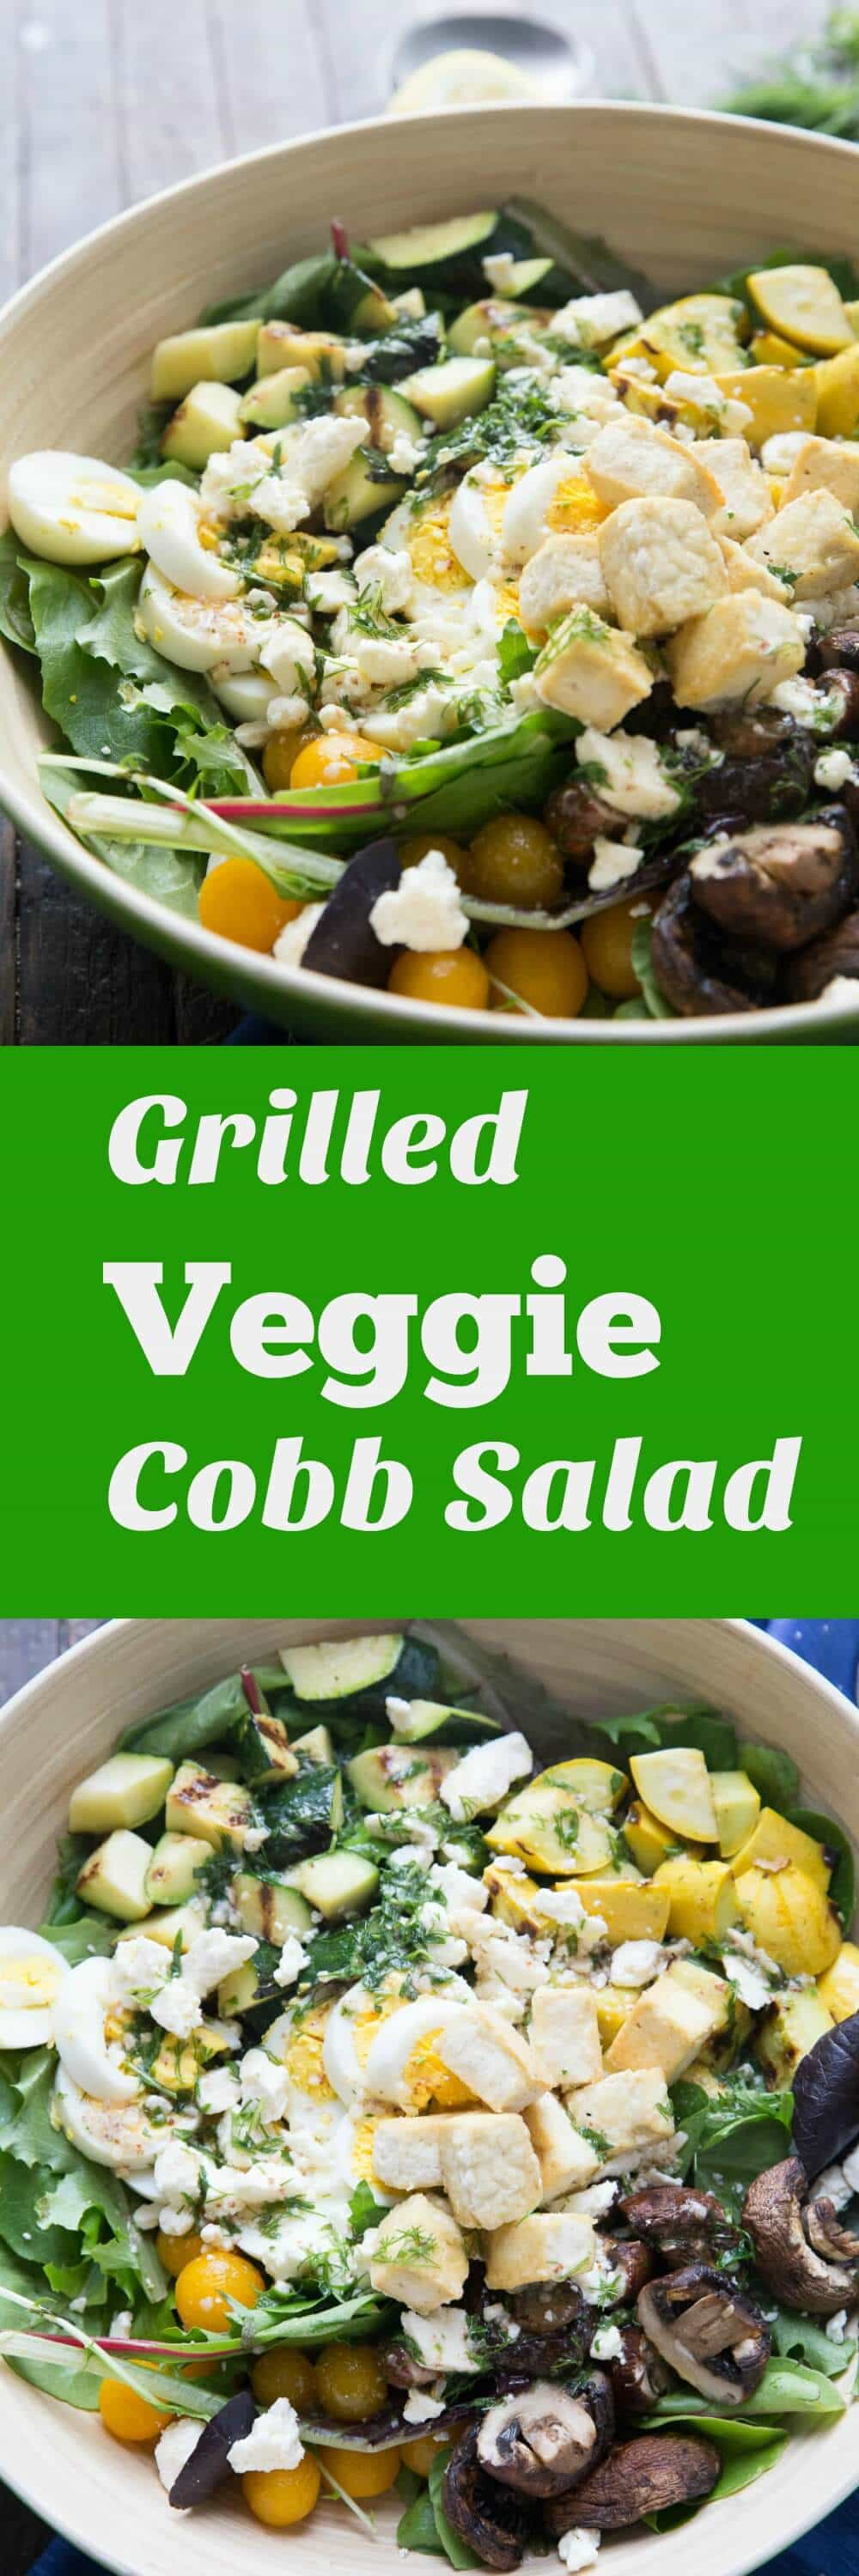 Want to feel good about yourself? Then this veggie Cobb salad is what you want! The flavor in this salad will have you hooked! lemonsforlulu.com